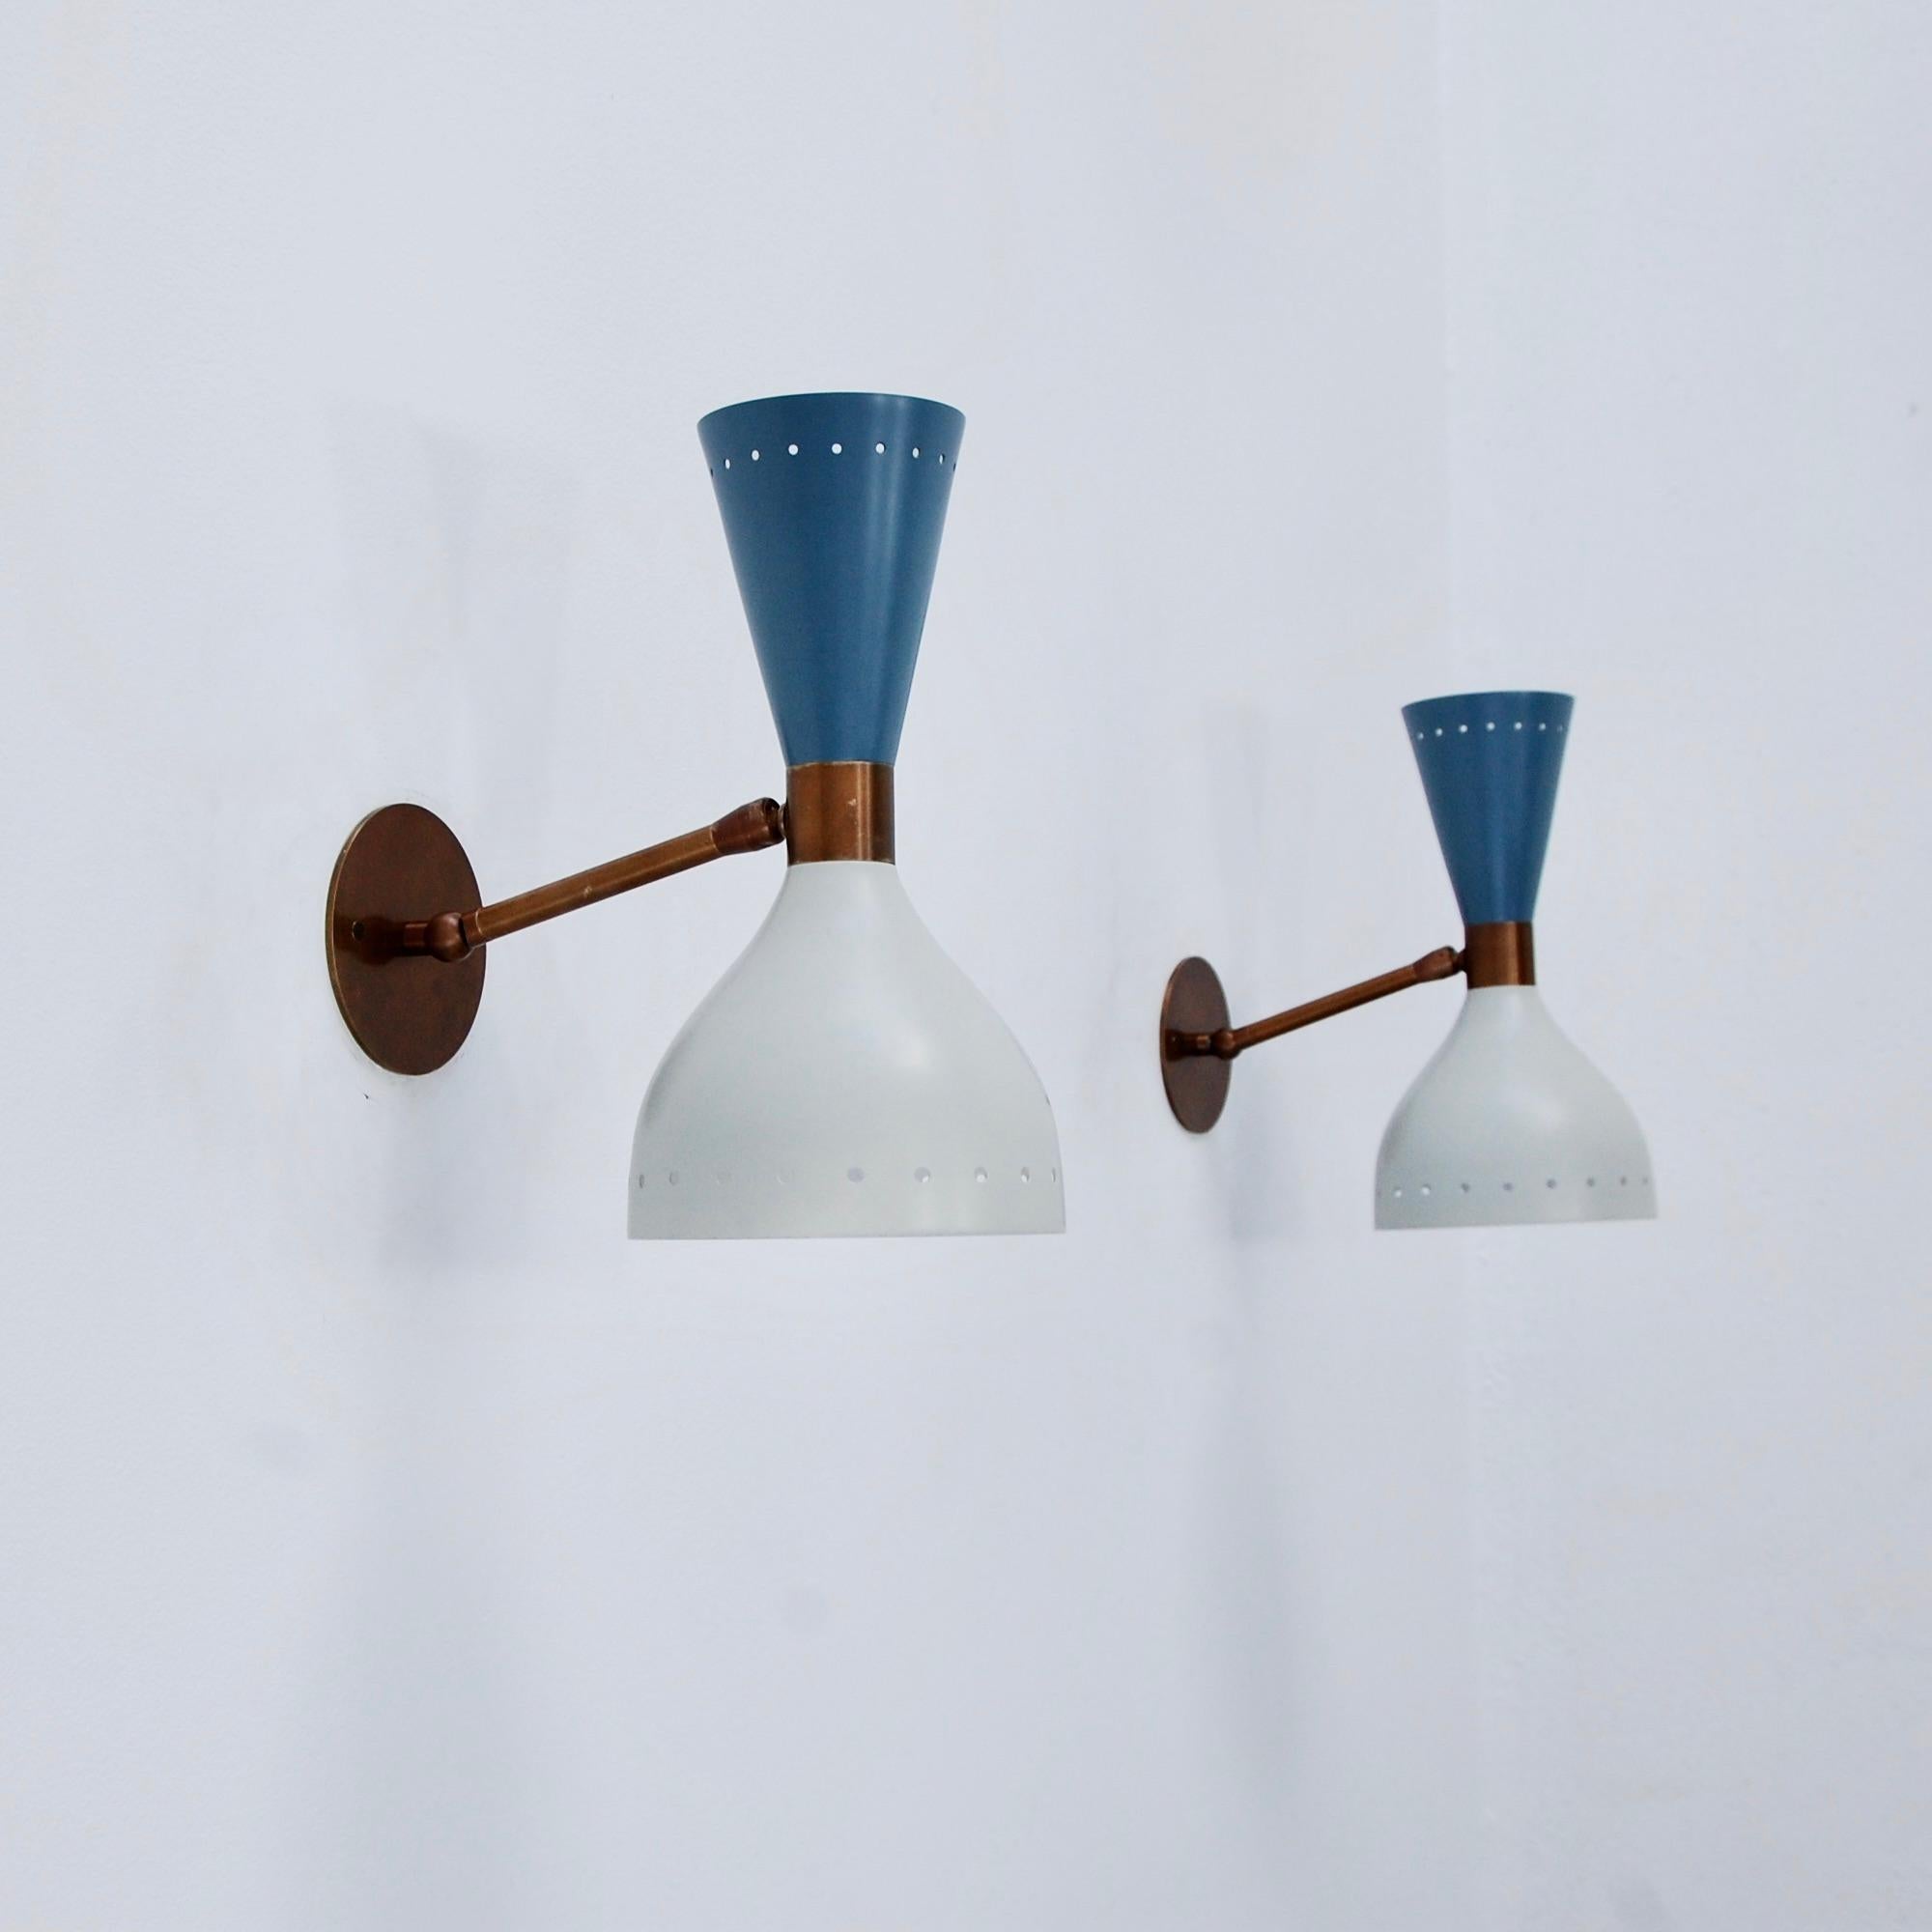 Part of Lumfardo Luminaries contemporary collection, the LUstice Sconce is a companion sconce to our LUstice chandelier. Fabricated in a Classic Mid-Century Modern design, crafted from painted aluminum, and patinated brass. This sconce can be wired